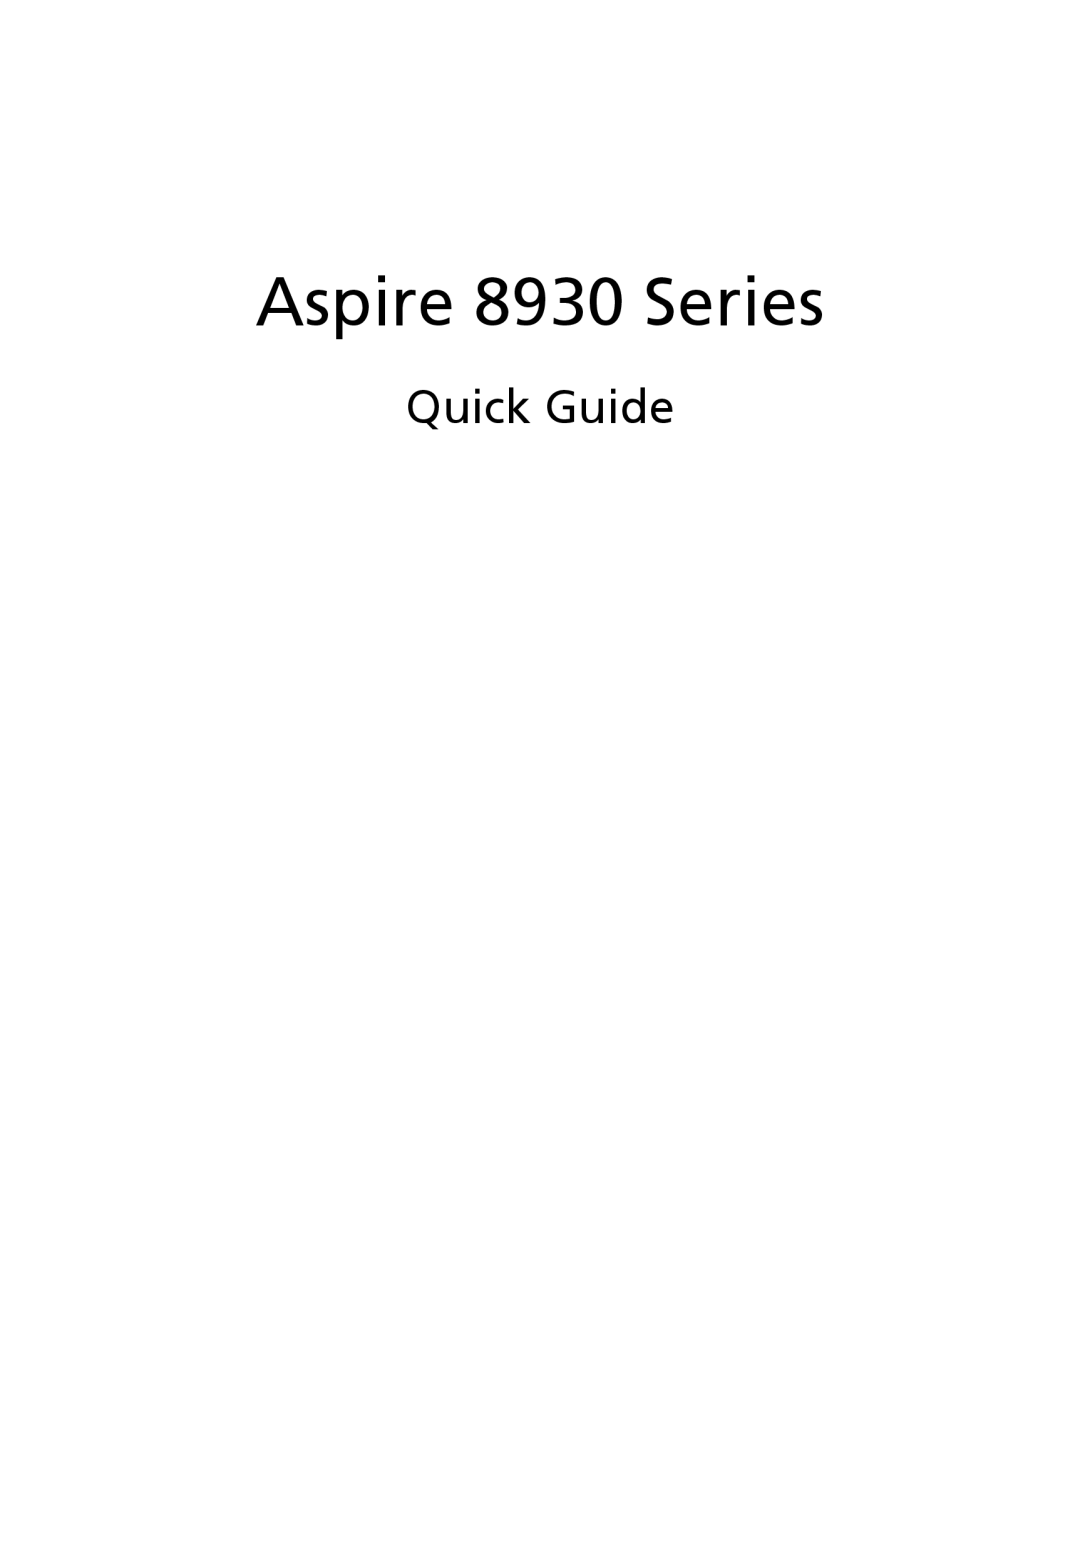 Acer 8930Q, 8930G manual Quick Guide, Aspire 8930 Series 